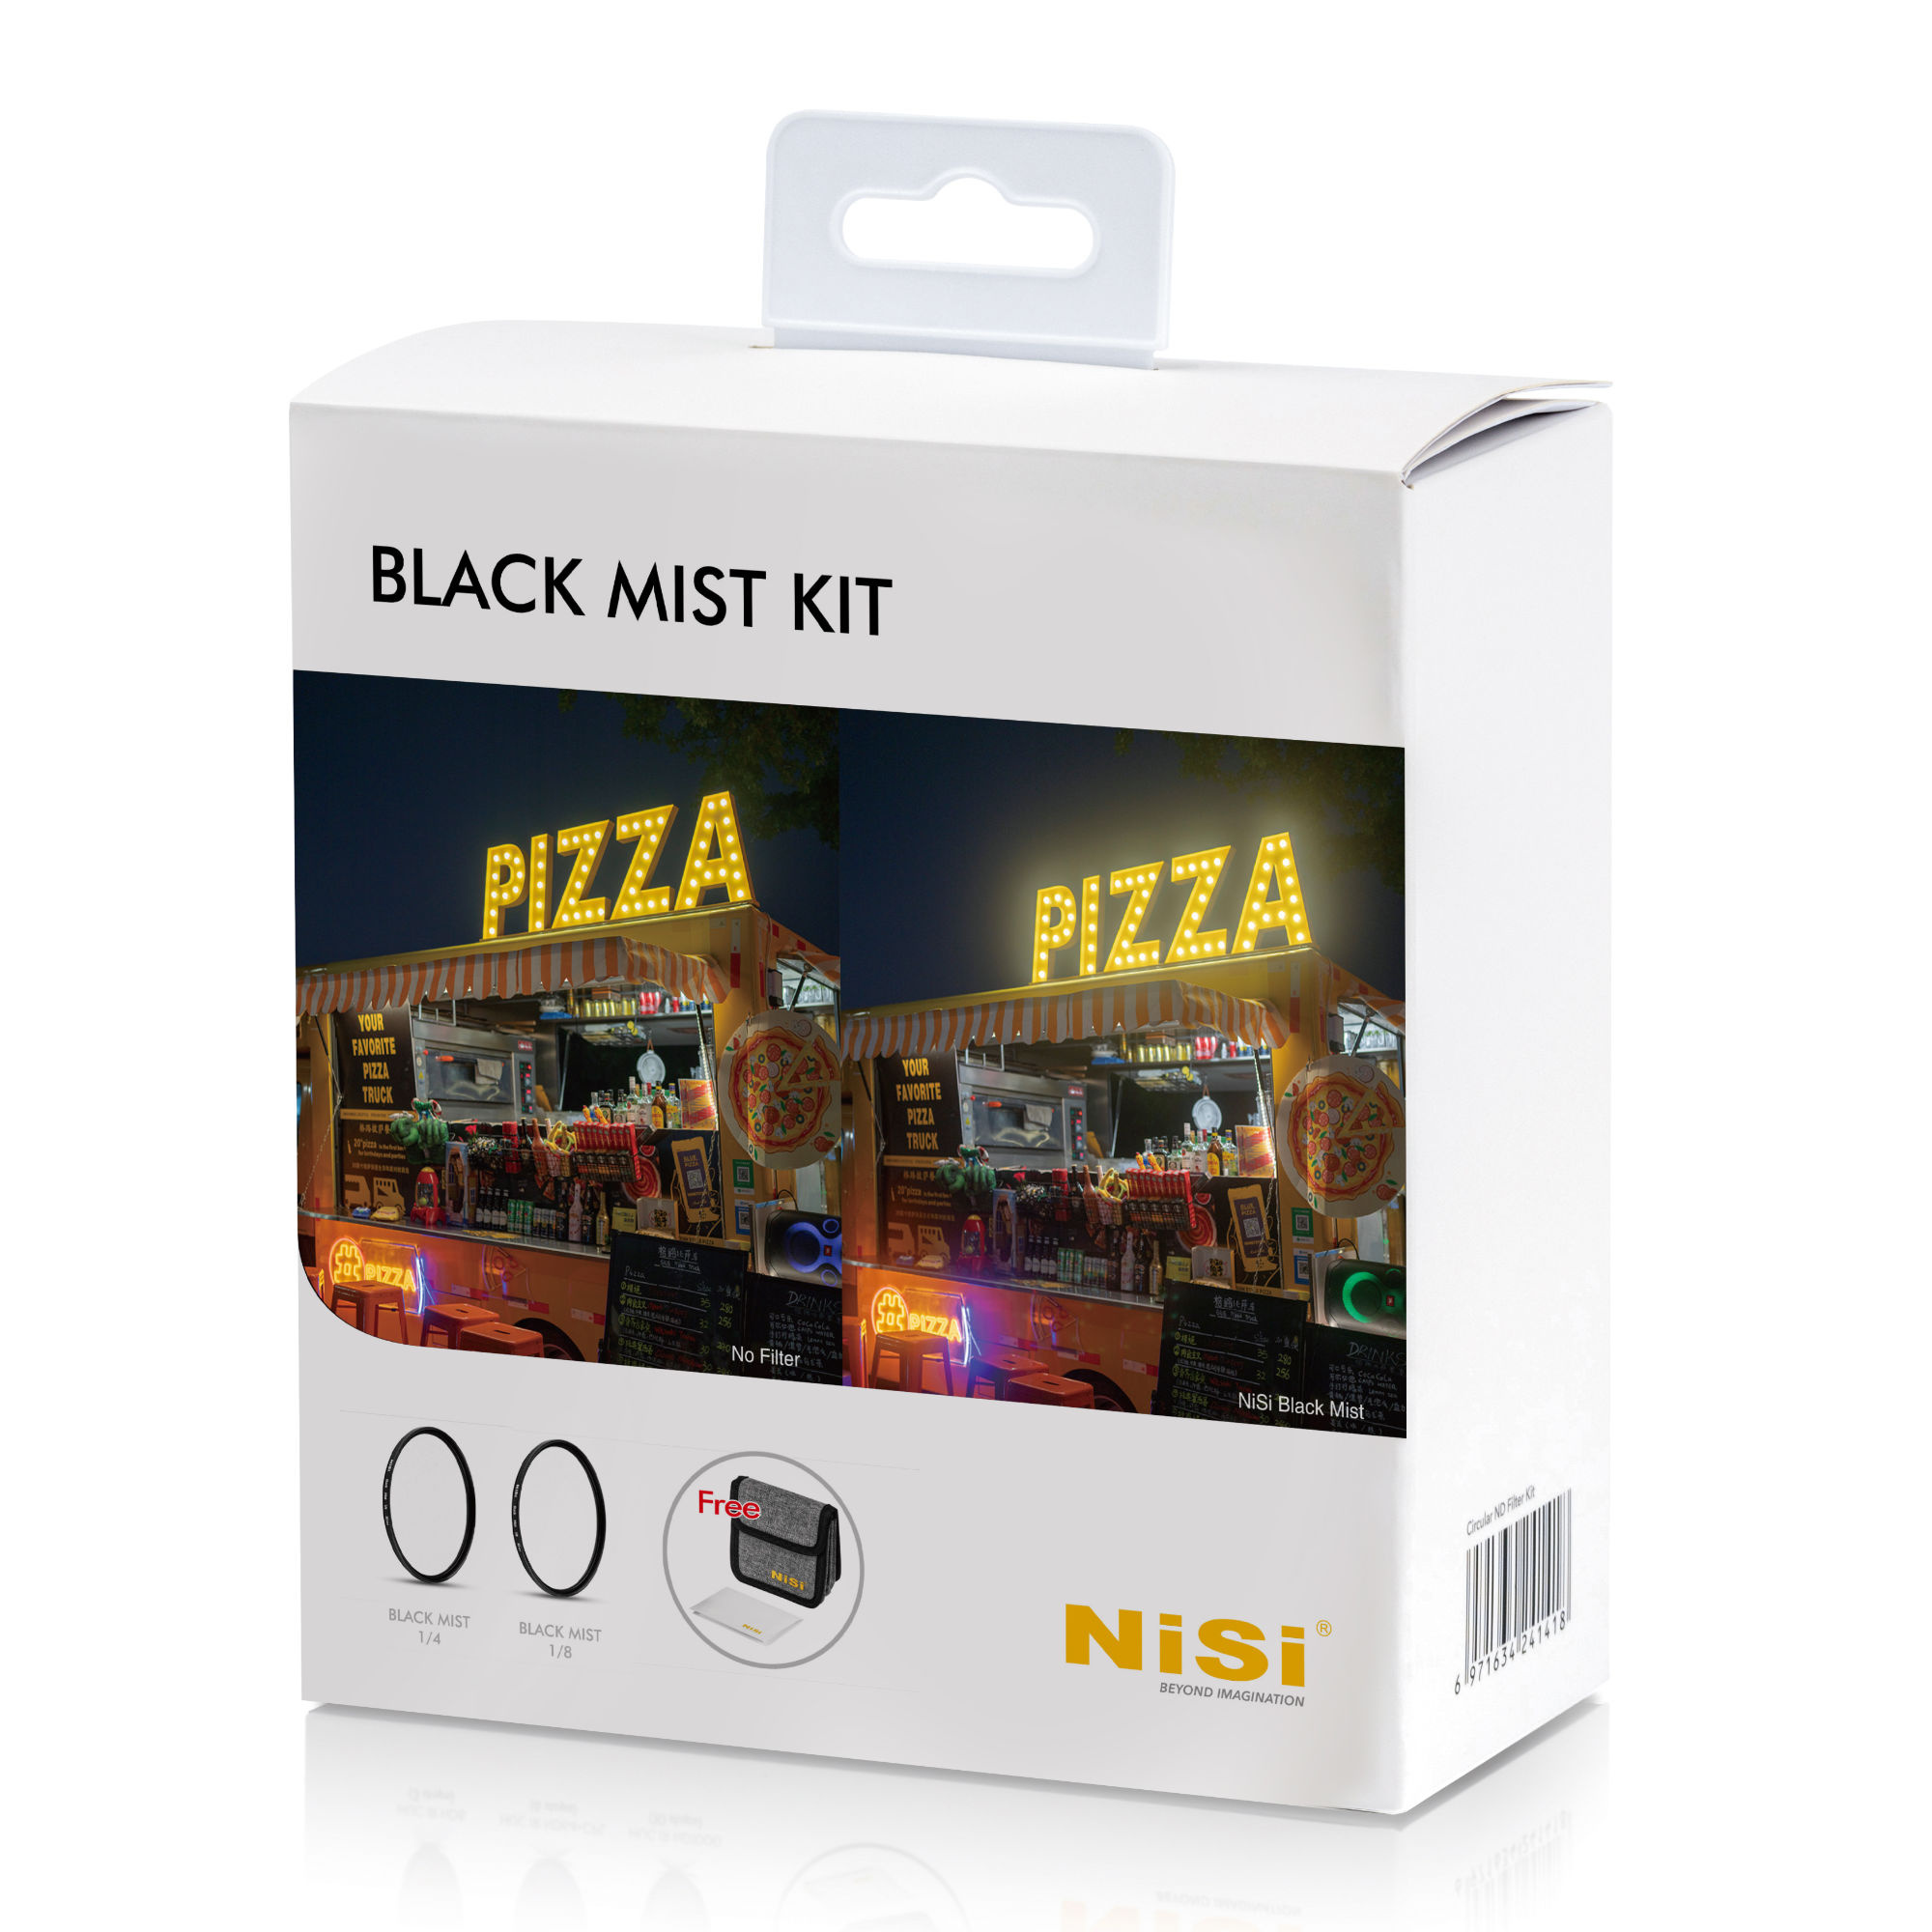 NiSi Black Mist Kit with 1/4, 1/8 and Case (58mm)